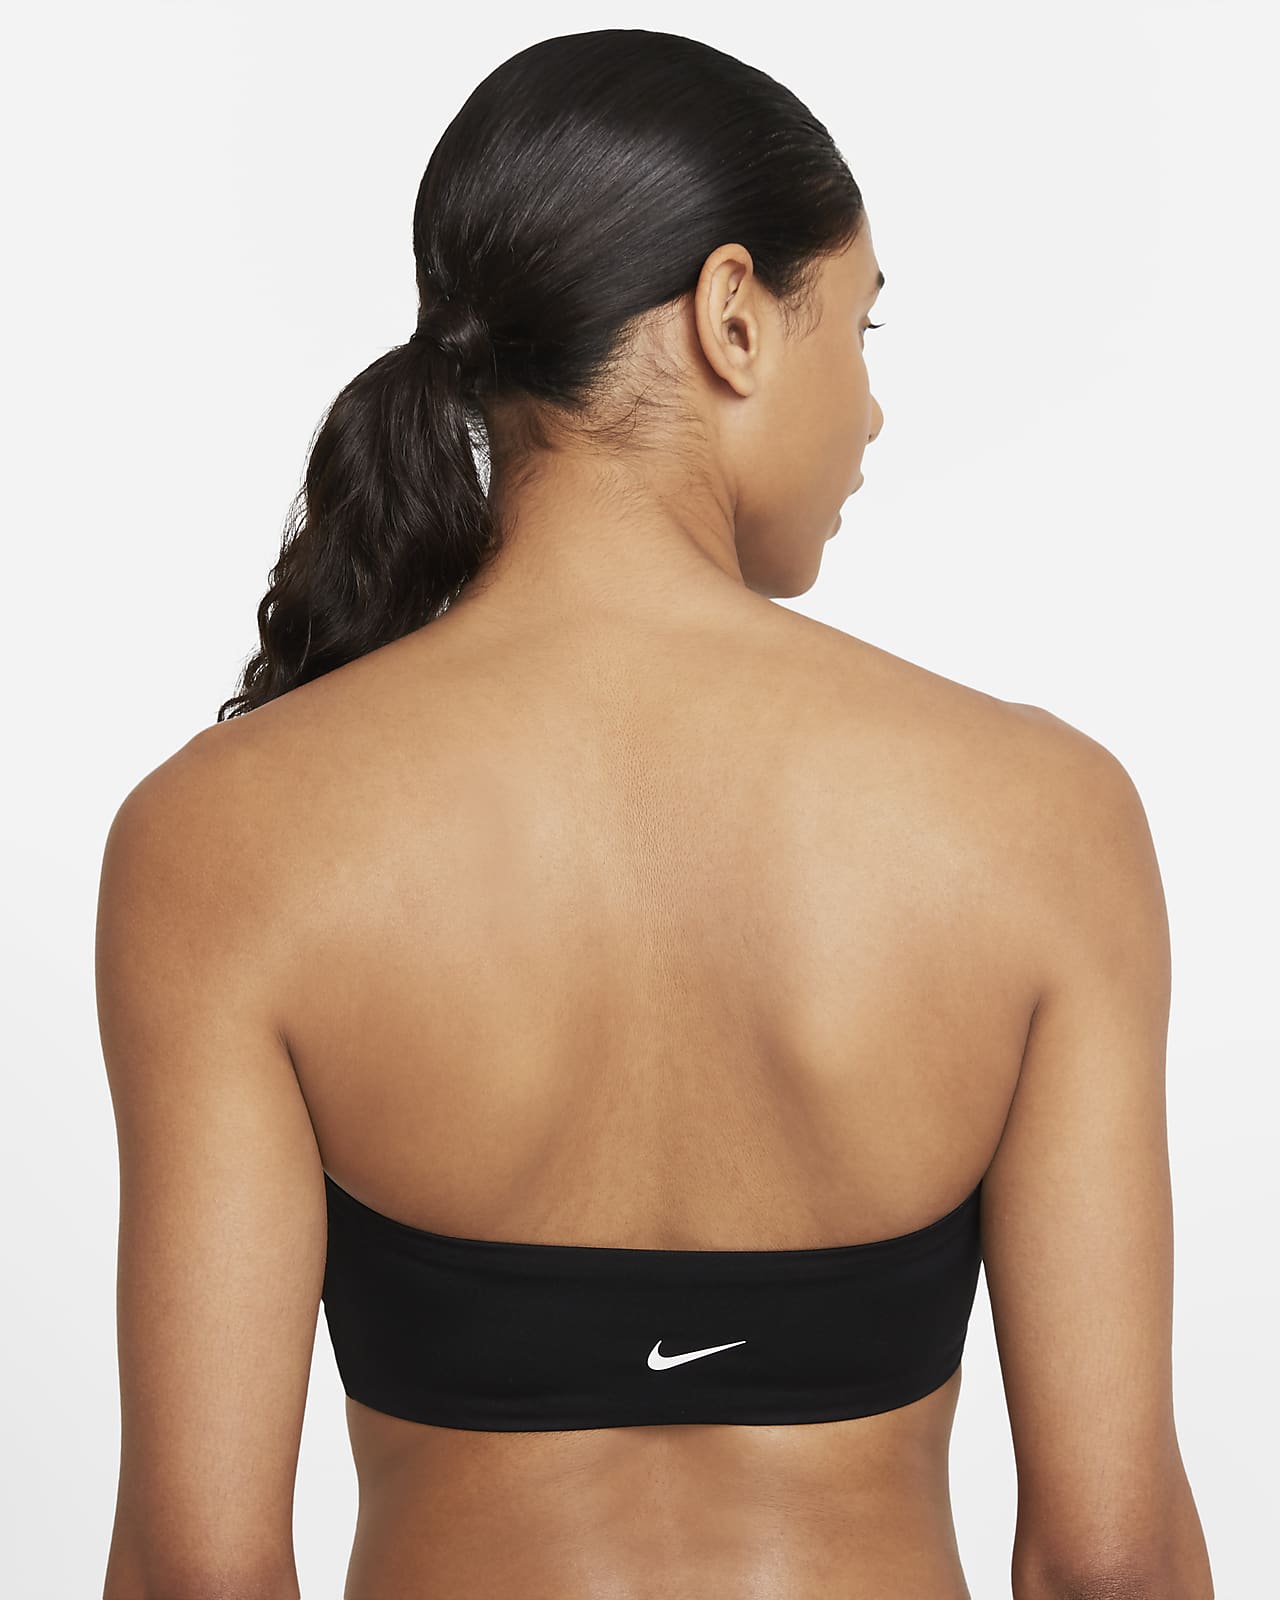 The Best Nike Swimsuits for Women. Nike UK